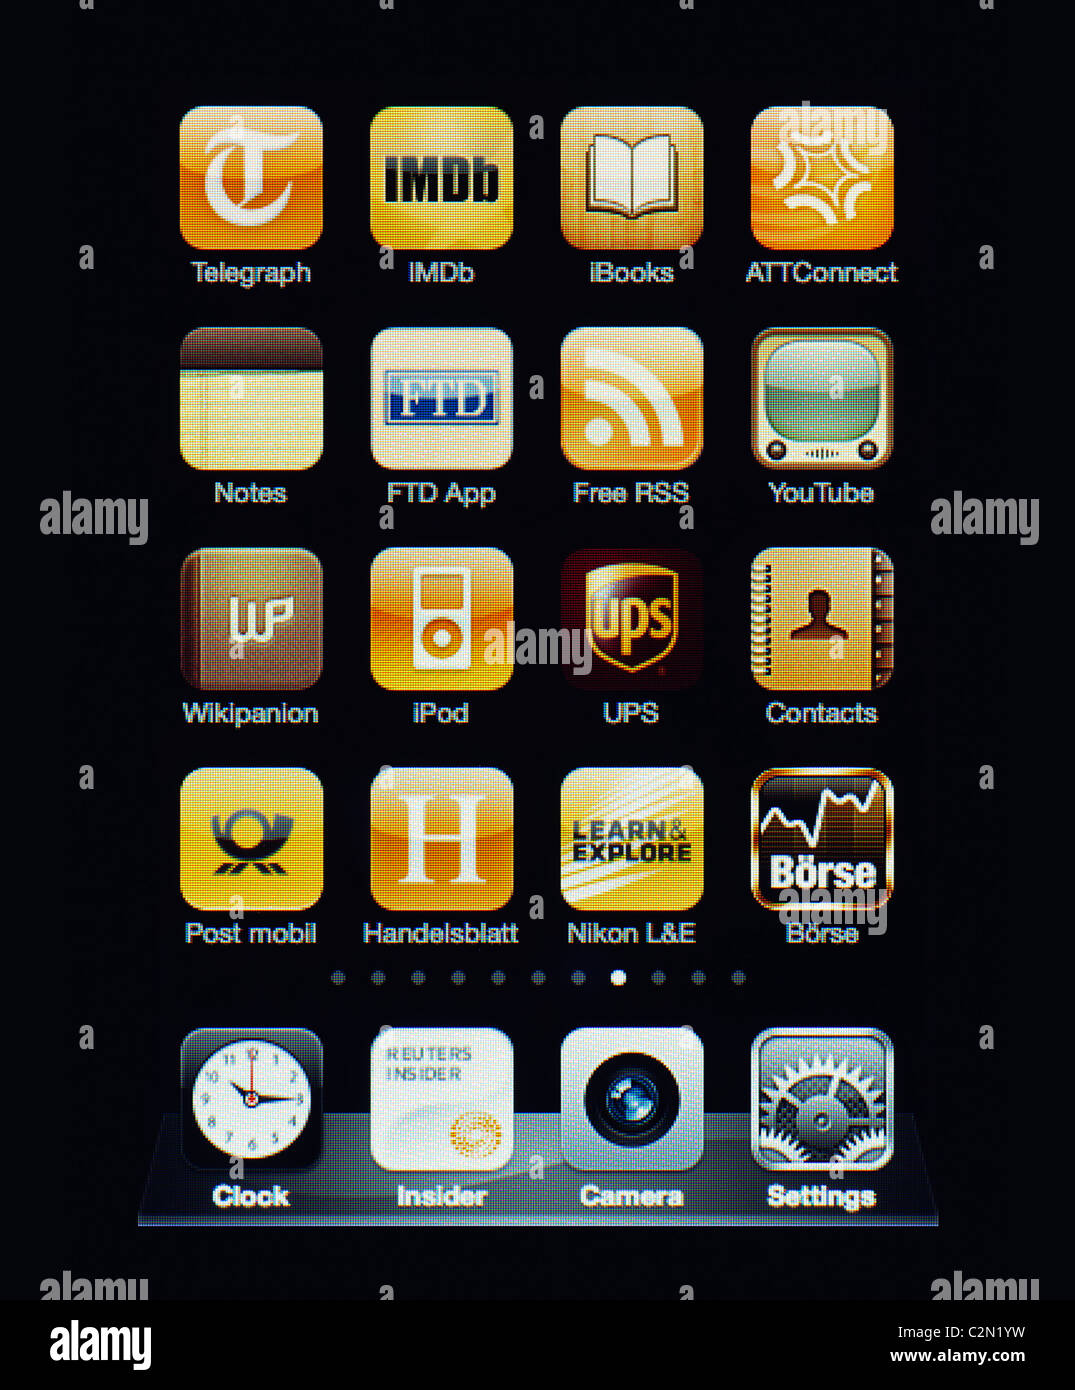 Image of the iphone touch screen. Display shows a collection of useful apps with yellow color scheme. Stock Photo